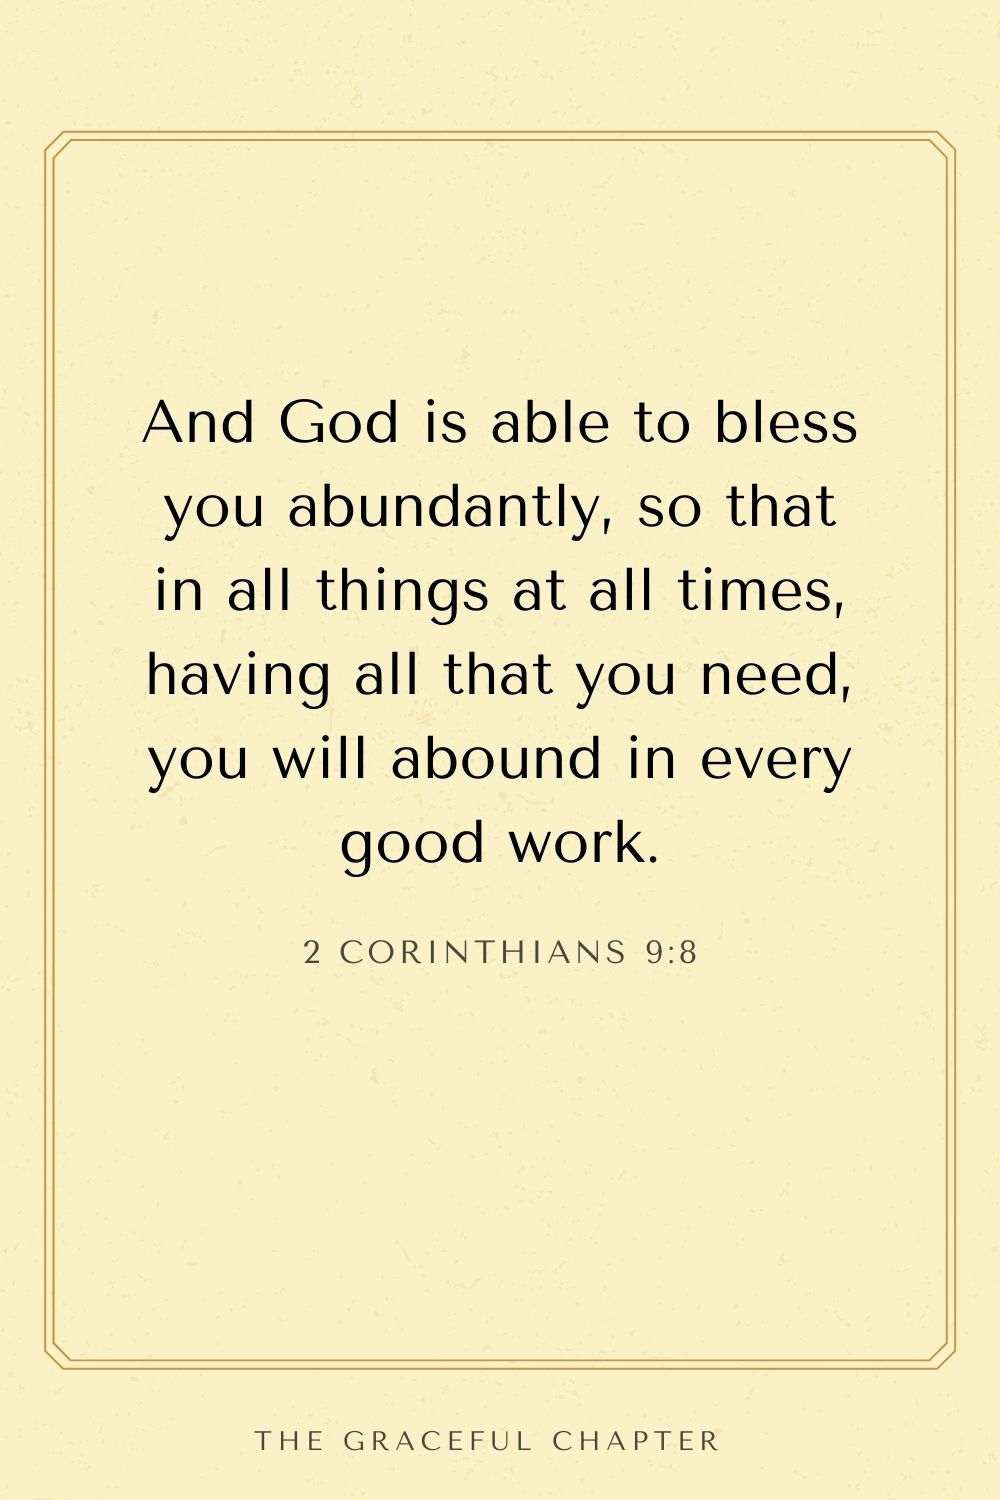 And God is able to bless you abundantly, so that in all things at all times, having all that you need, you will abound in every good work. 2 Corinthians 9:8